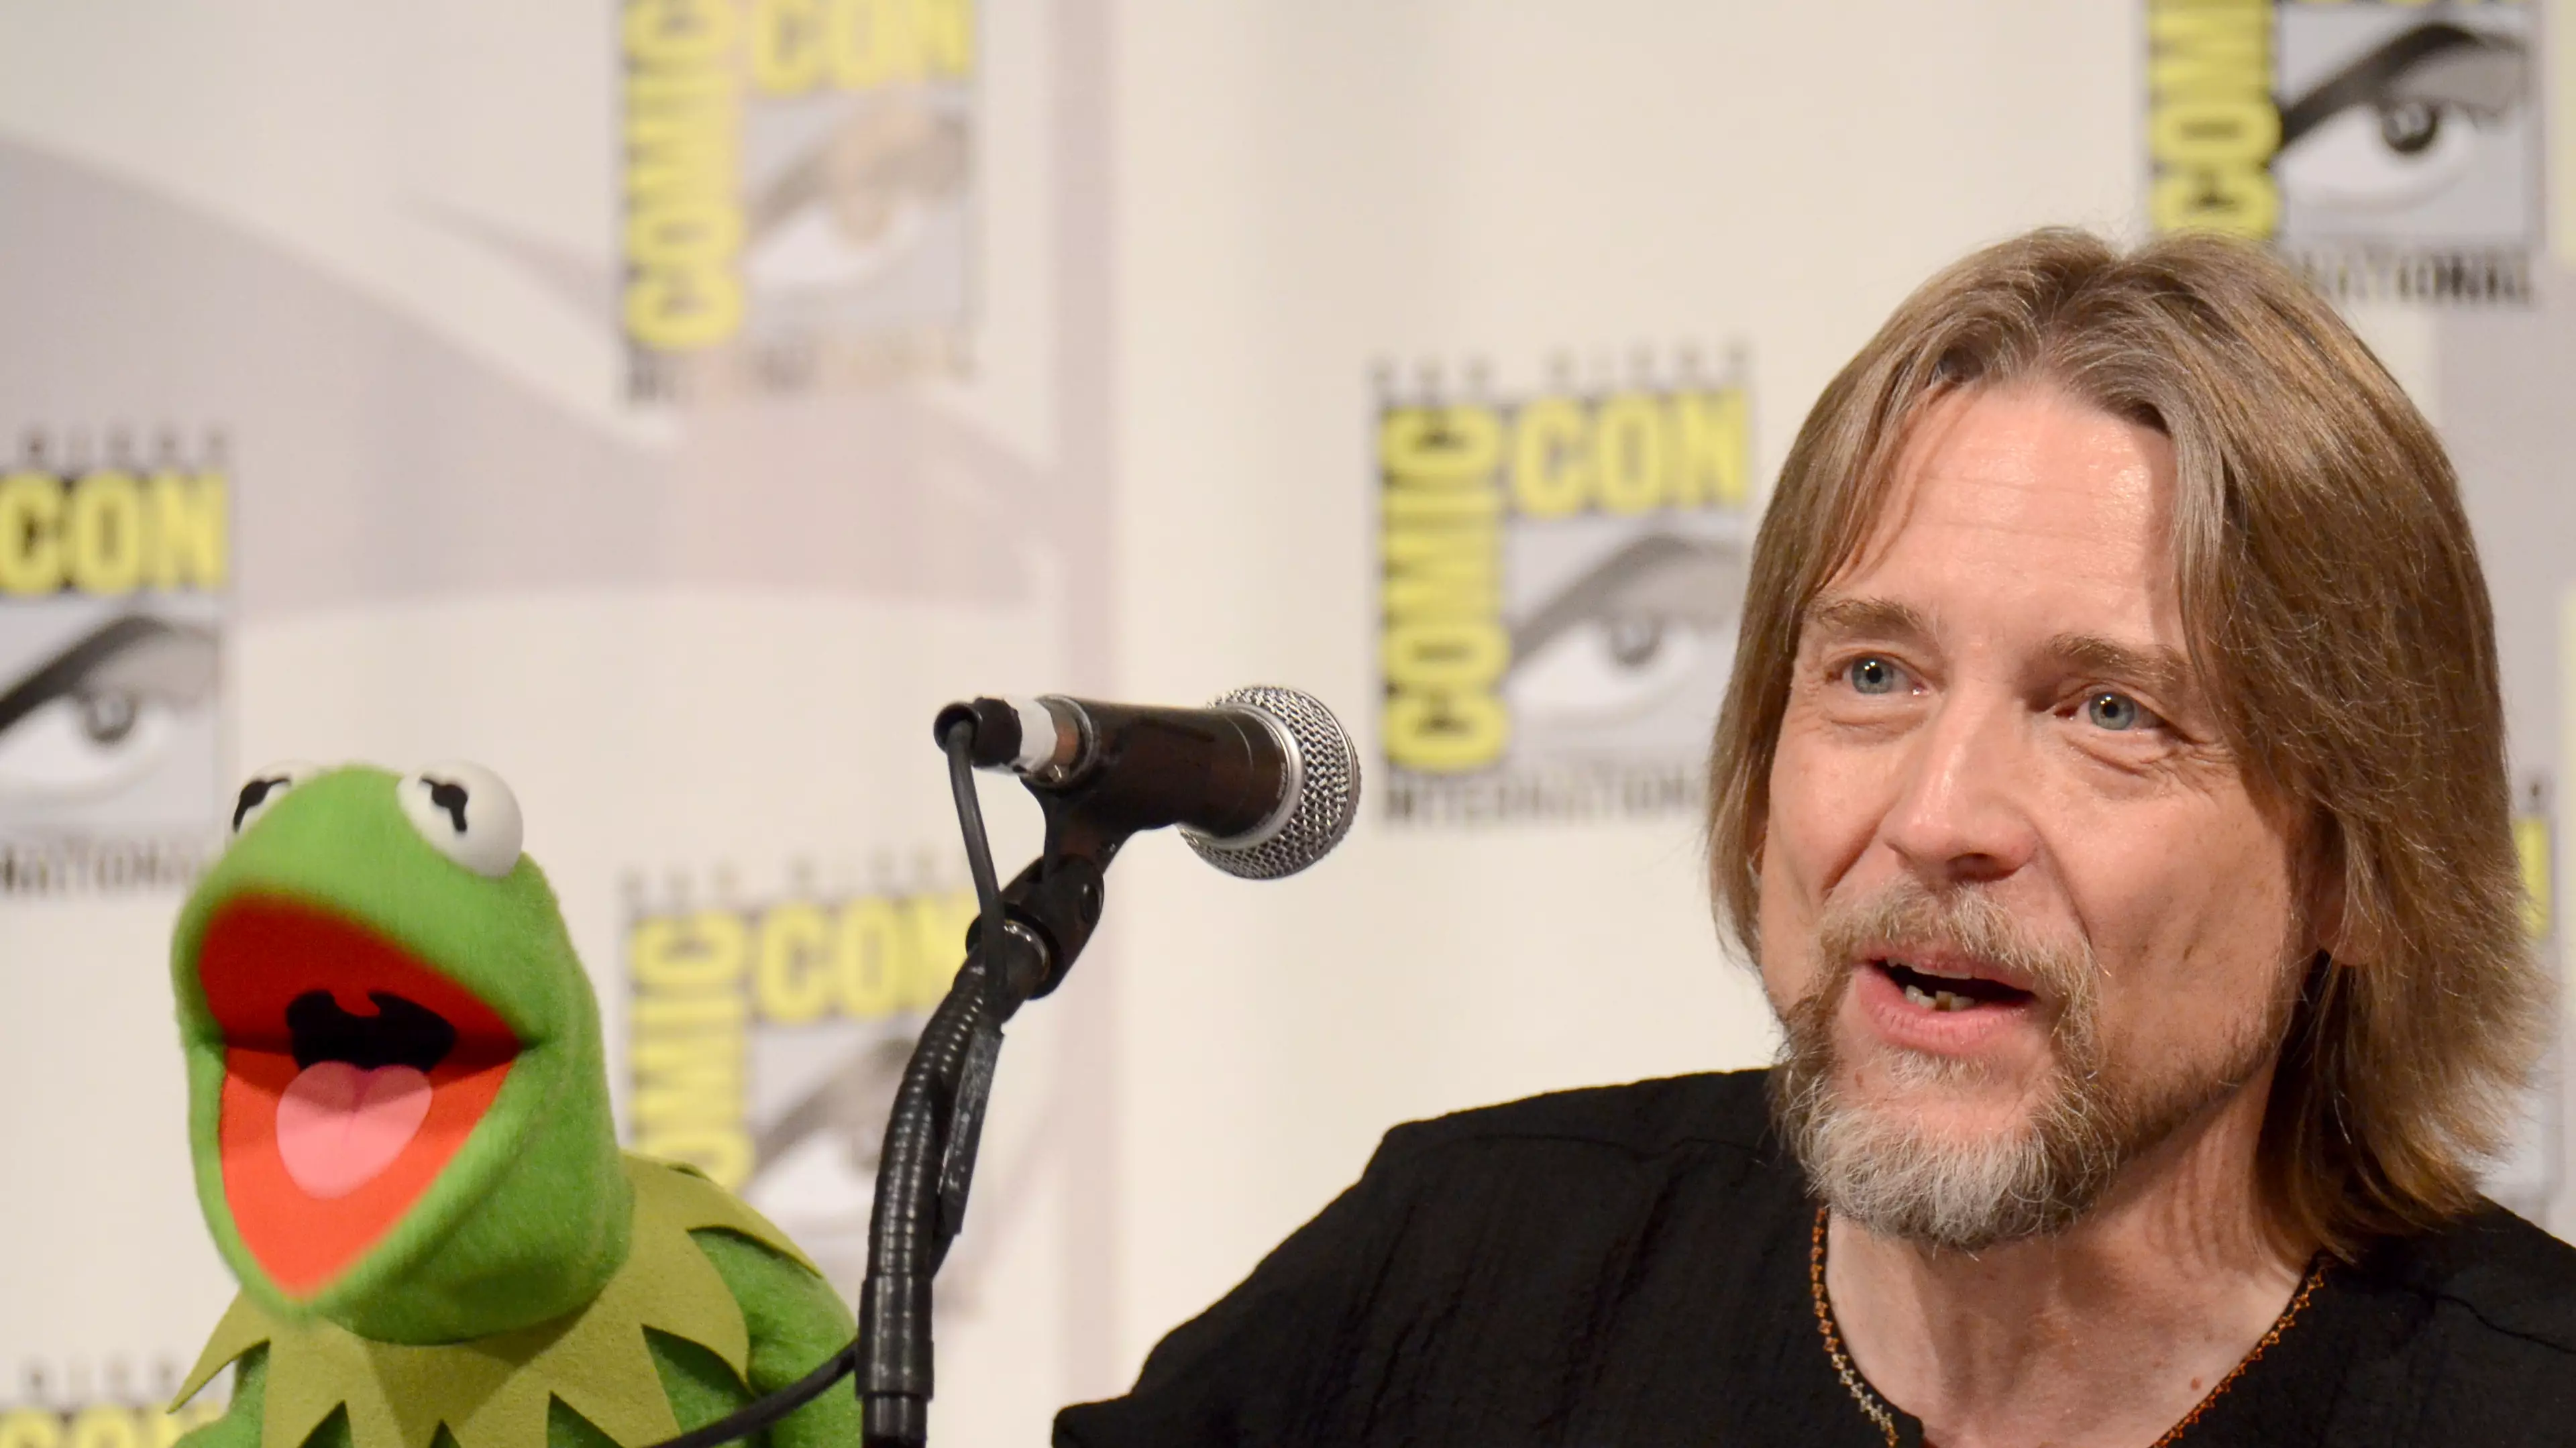 Kermit The Frog Voice Actor Dismissed For 'Unacceptable Business Conduct'